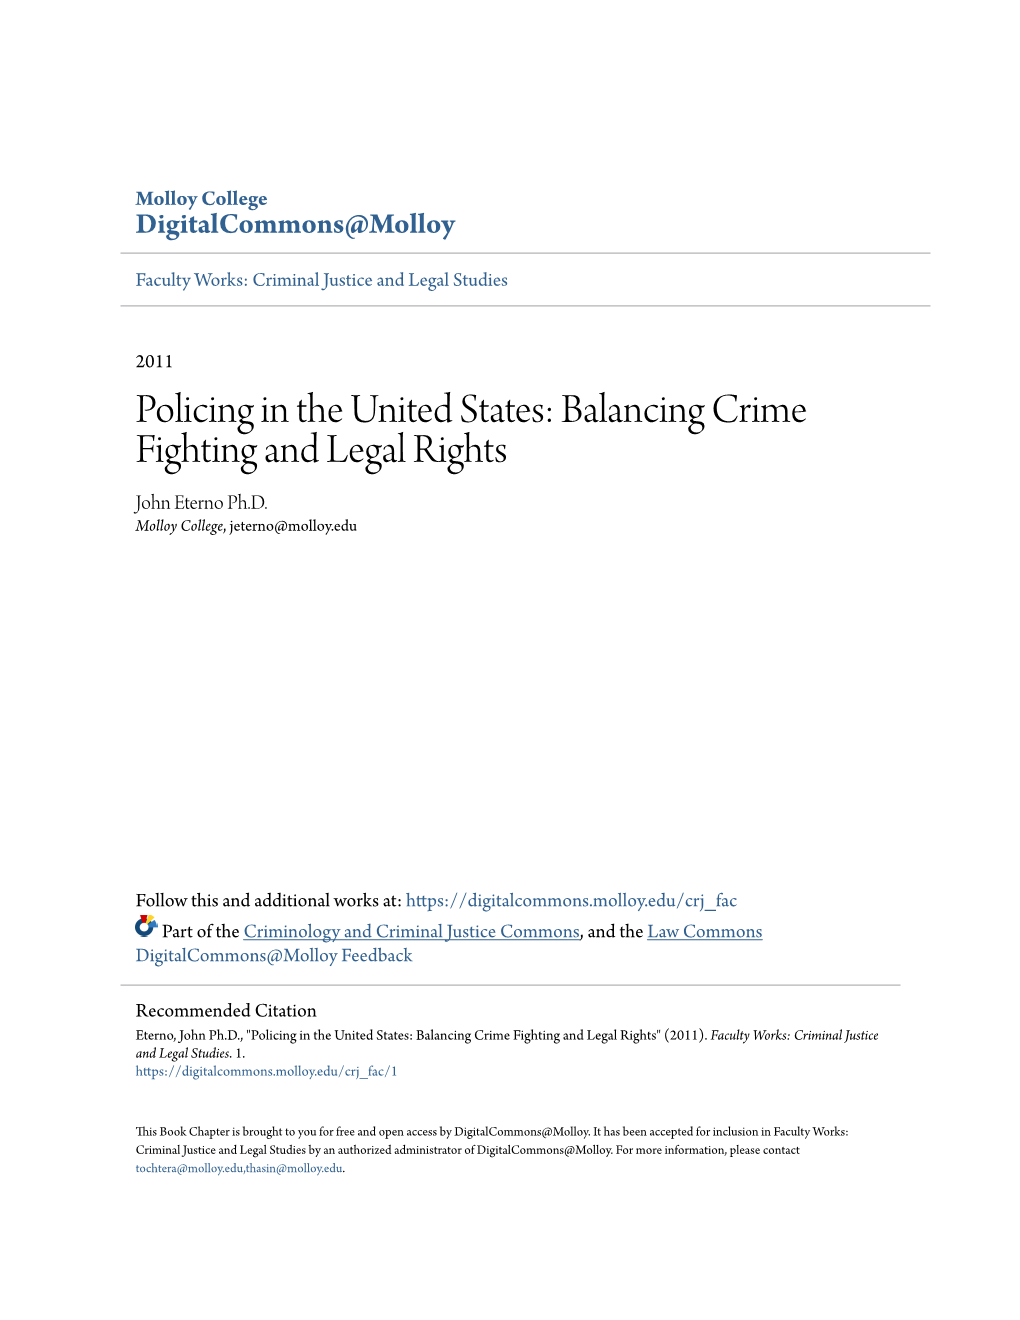 Policing in the United States: Balancing Crime Fighting and Legal Rights John Eterno Ph.D